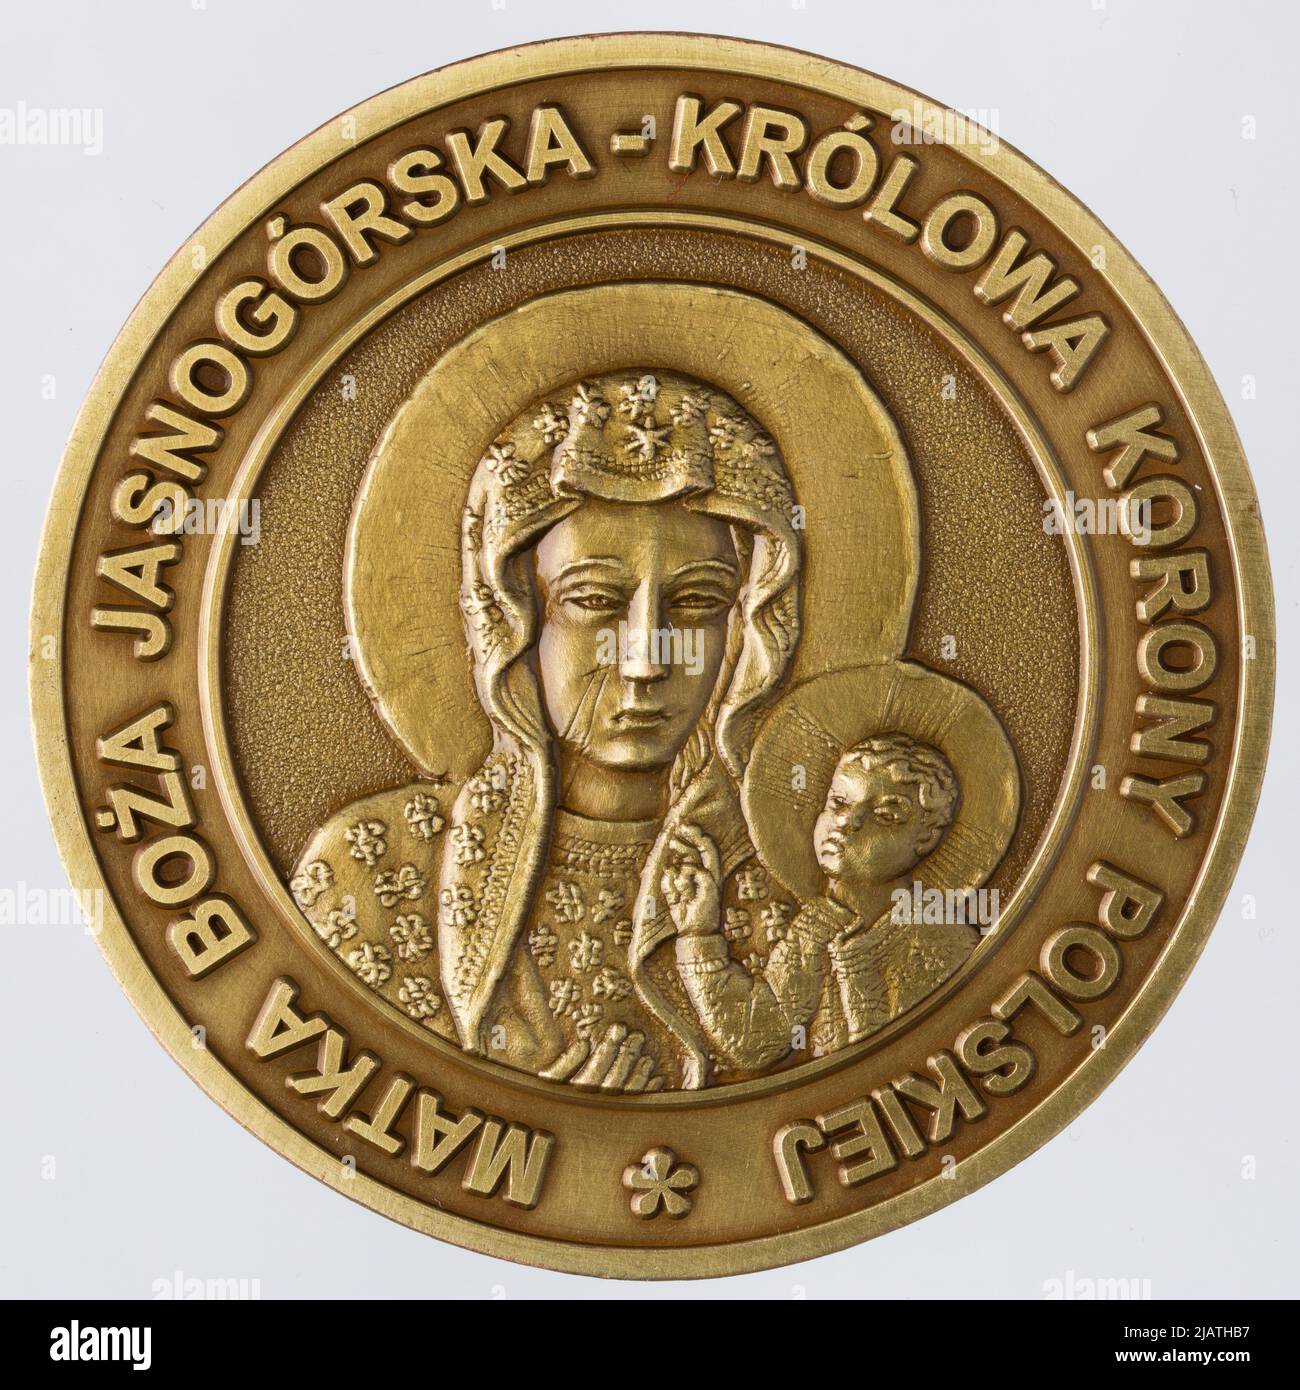 Medal issued on the occasion of the 300th anniversary of the coronation of the image of Our Lady of Częstochowa Sorcek, Marek, Kulej Foundry Export Import Stock Photo